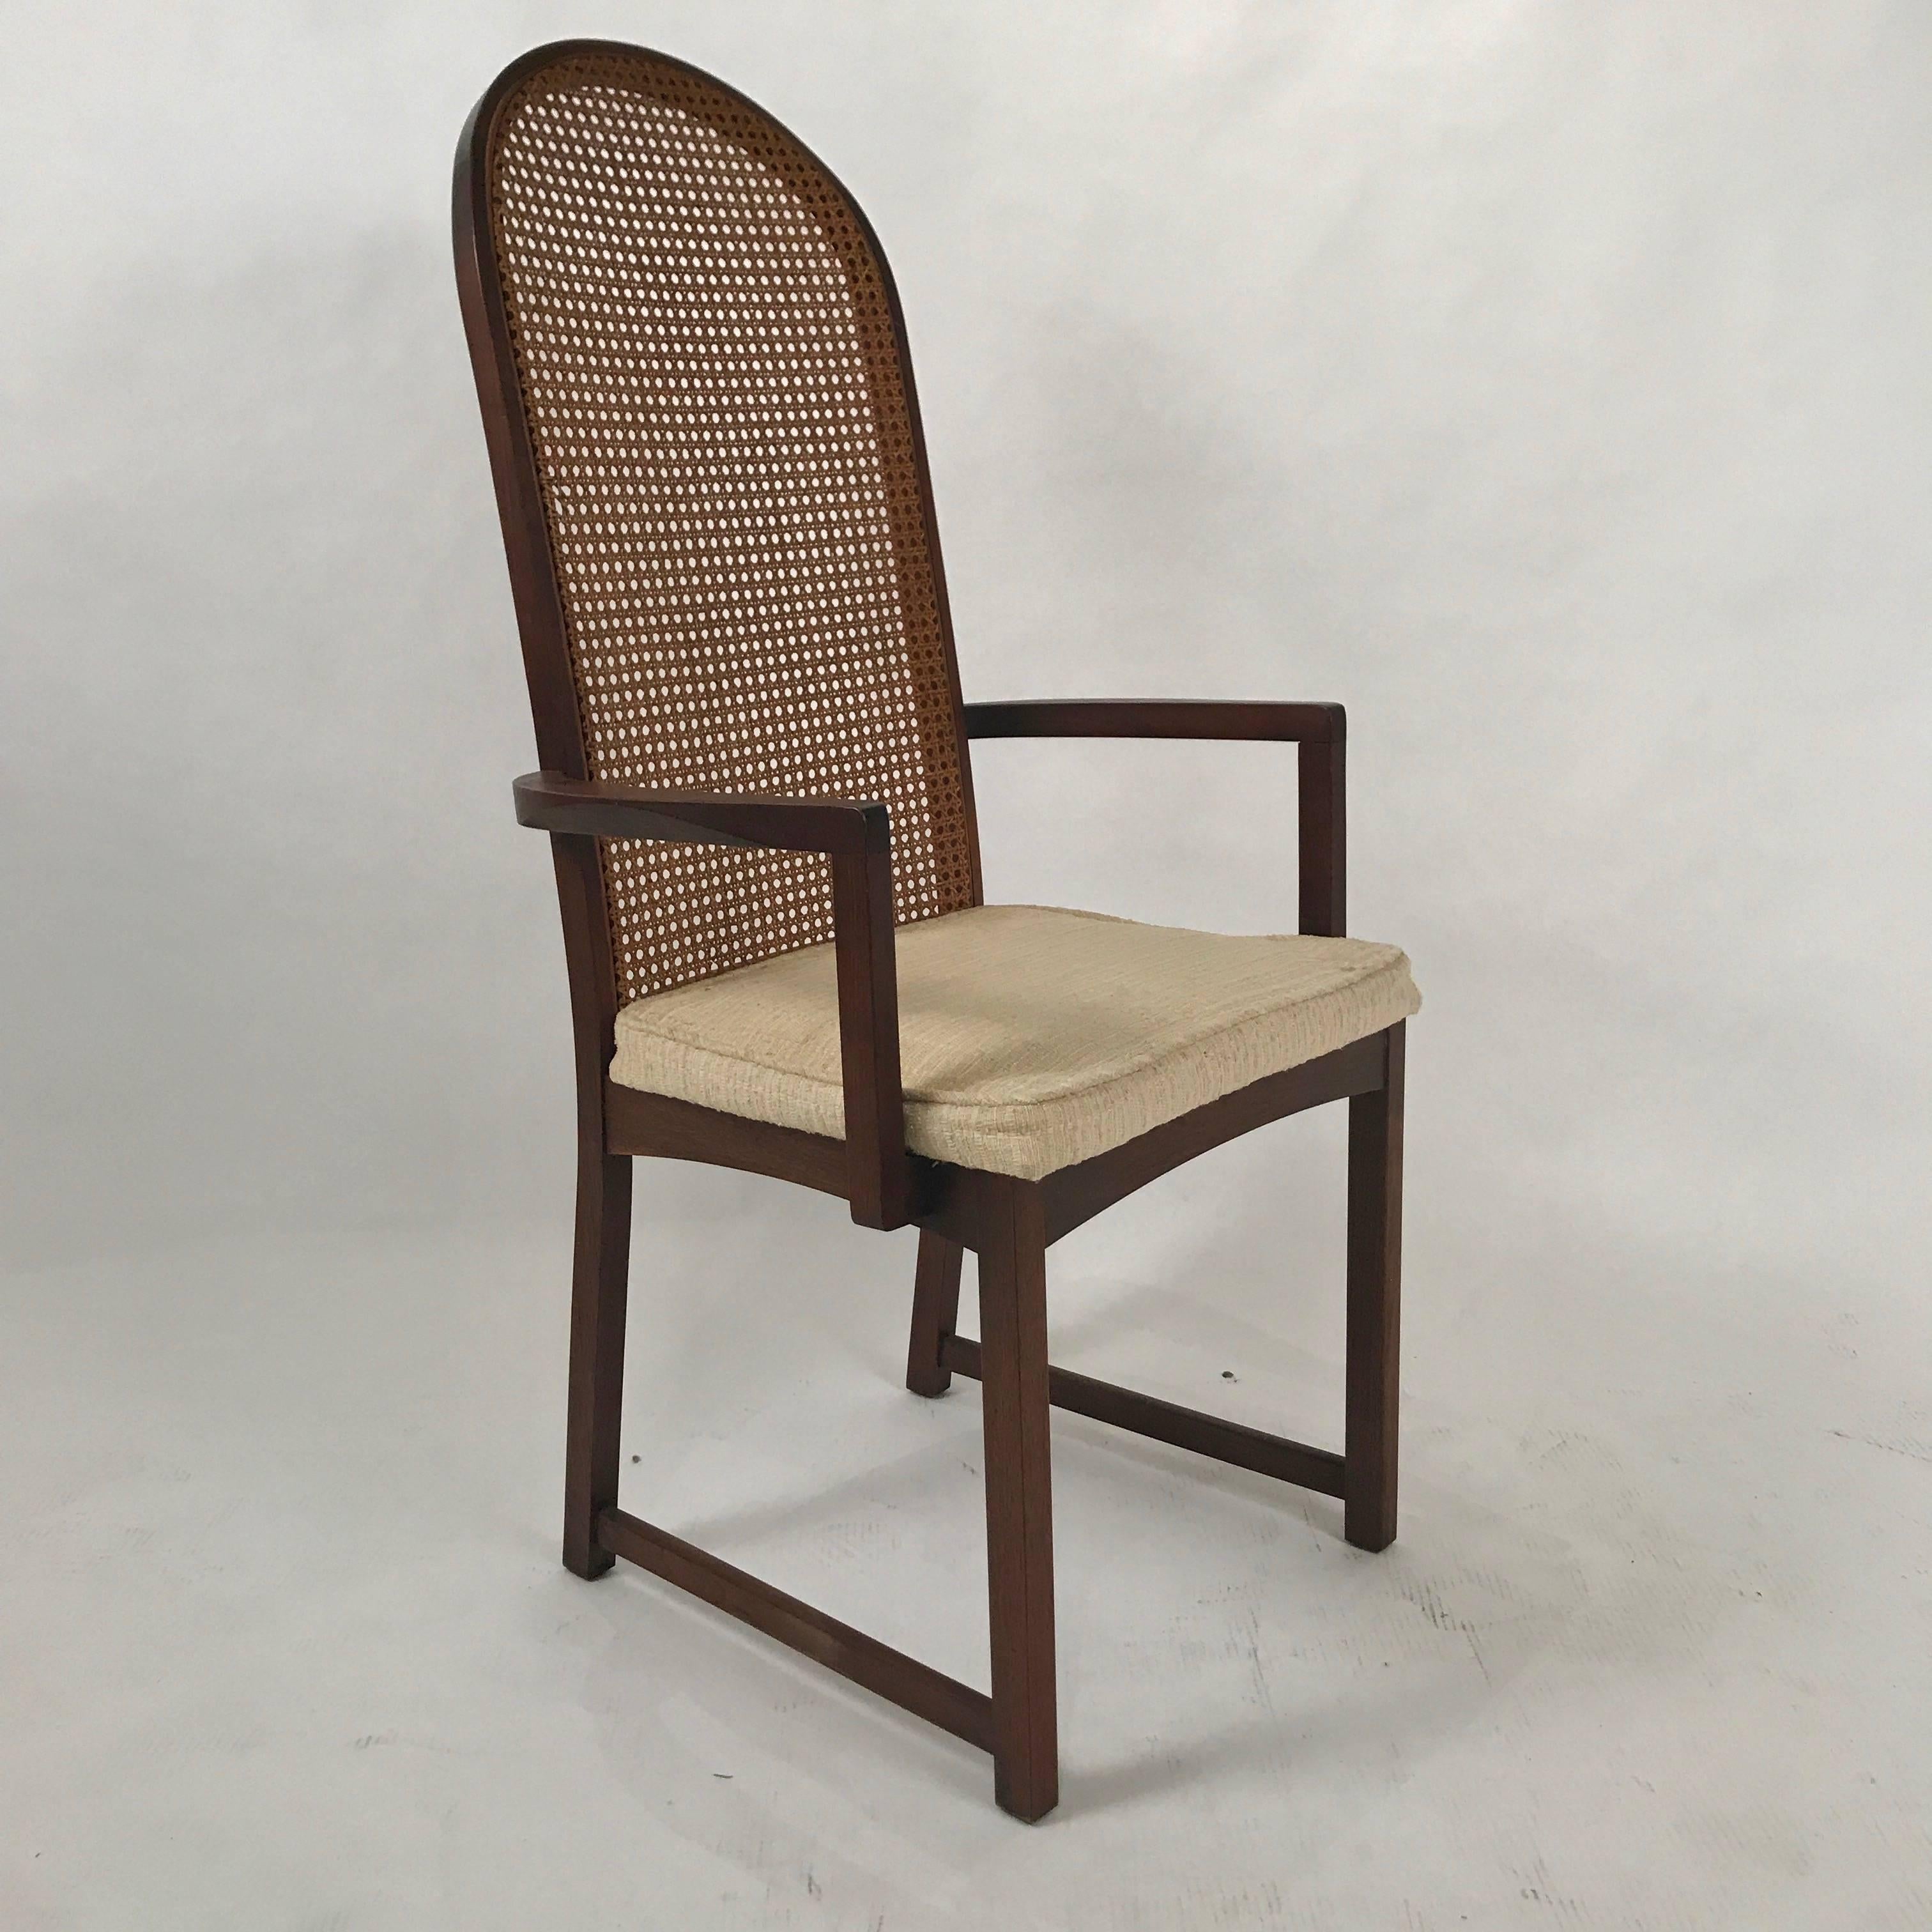 Caning Set of Six Milo Baughman High Back Cane and Walnut Dining Chairs for Directional